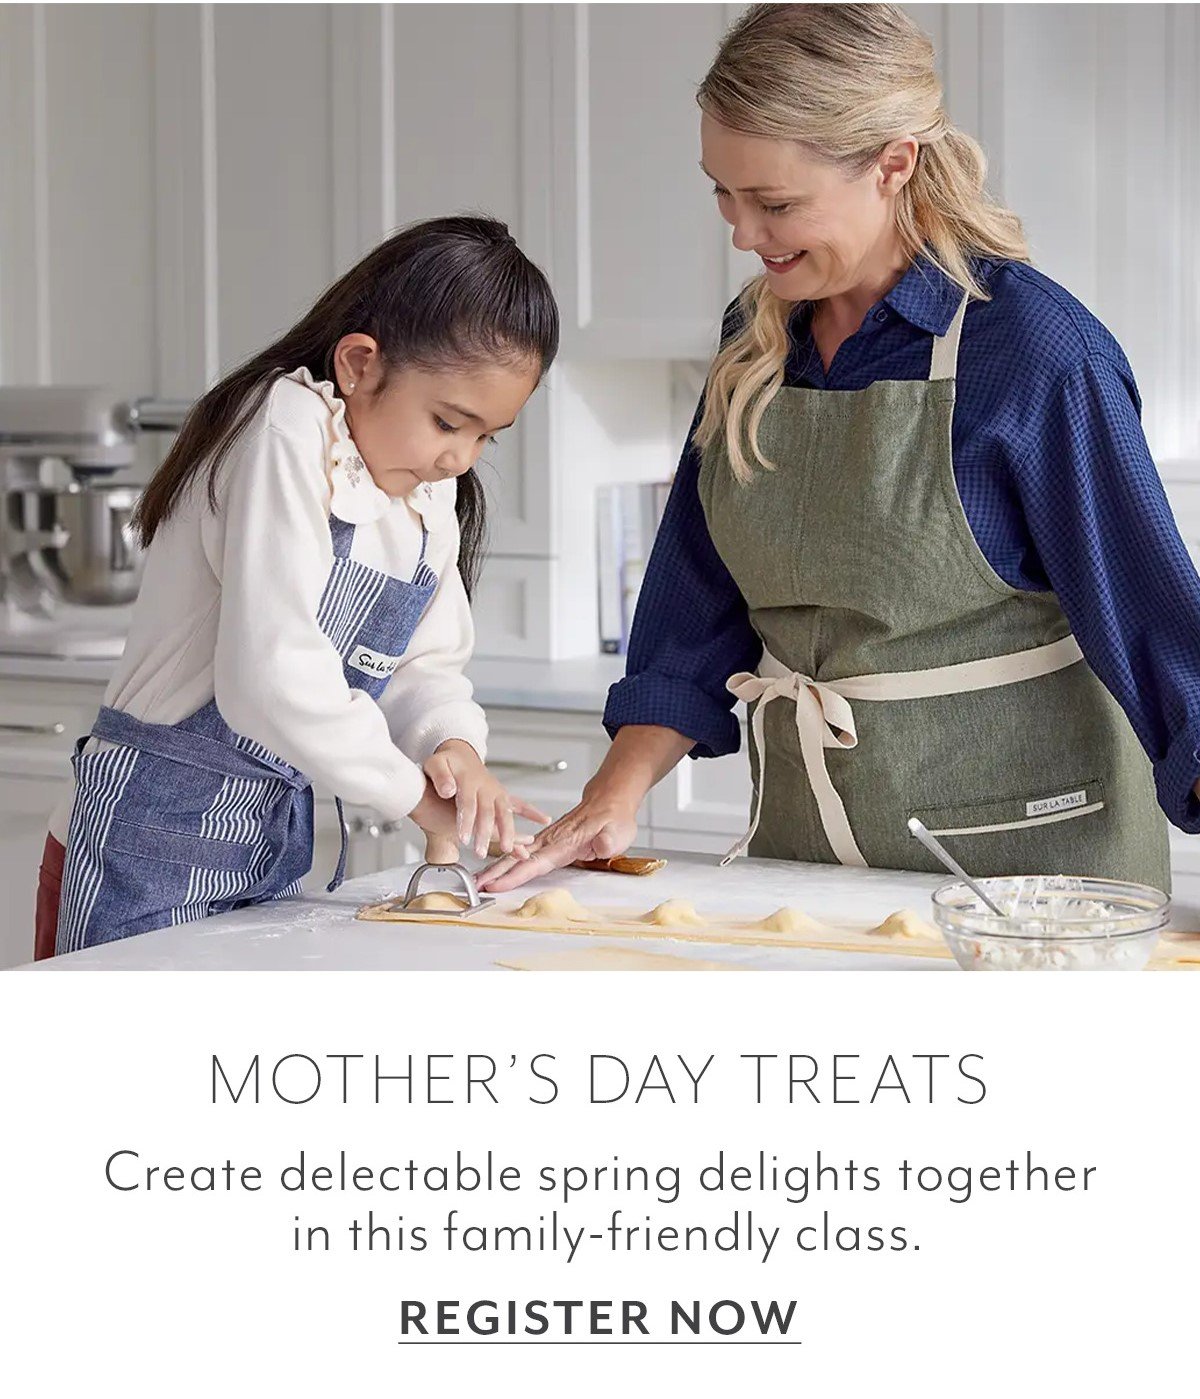 Family Fun: Mother’s Day Treats